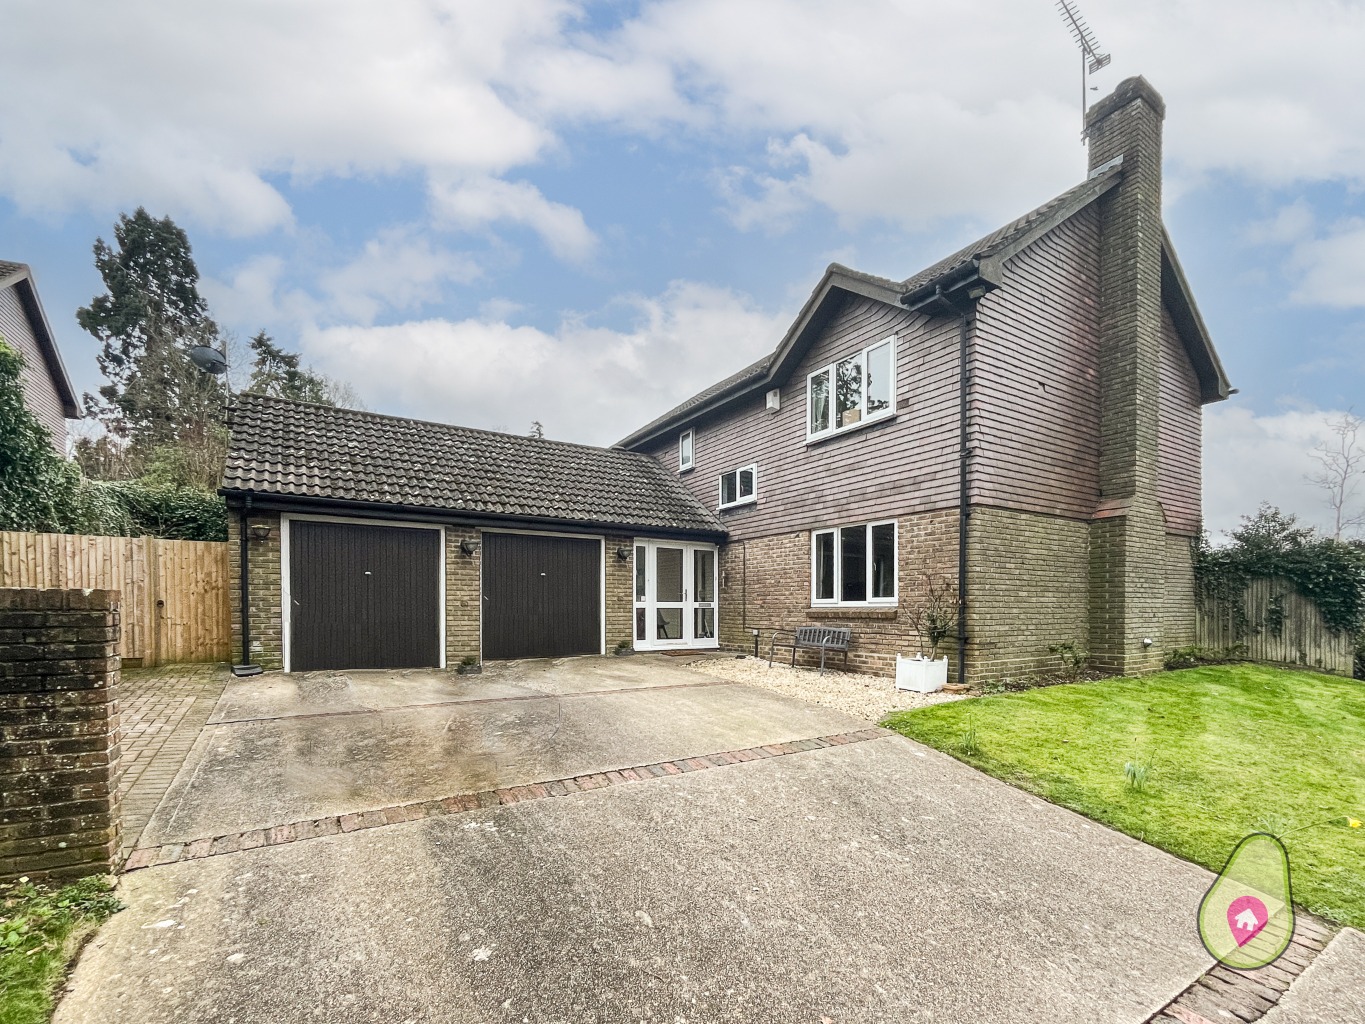 4 bed detached house to rent in Geffers Ride, Ascot - Property Image 1